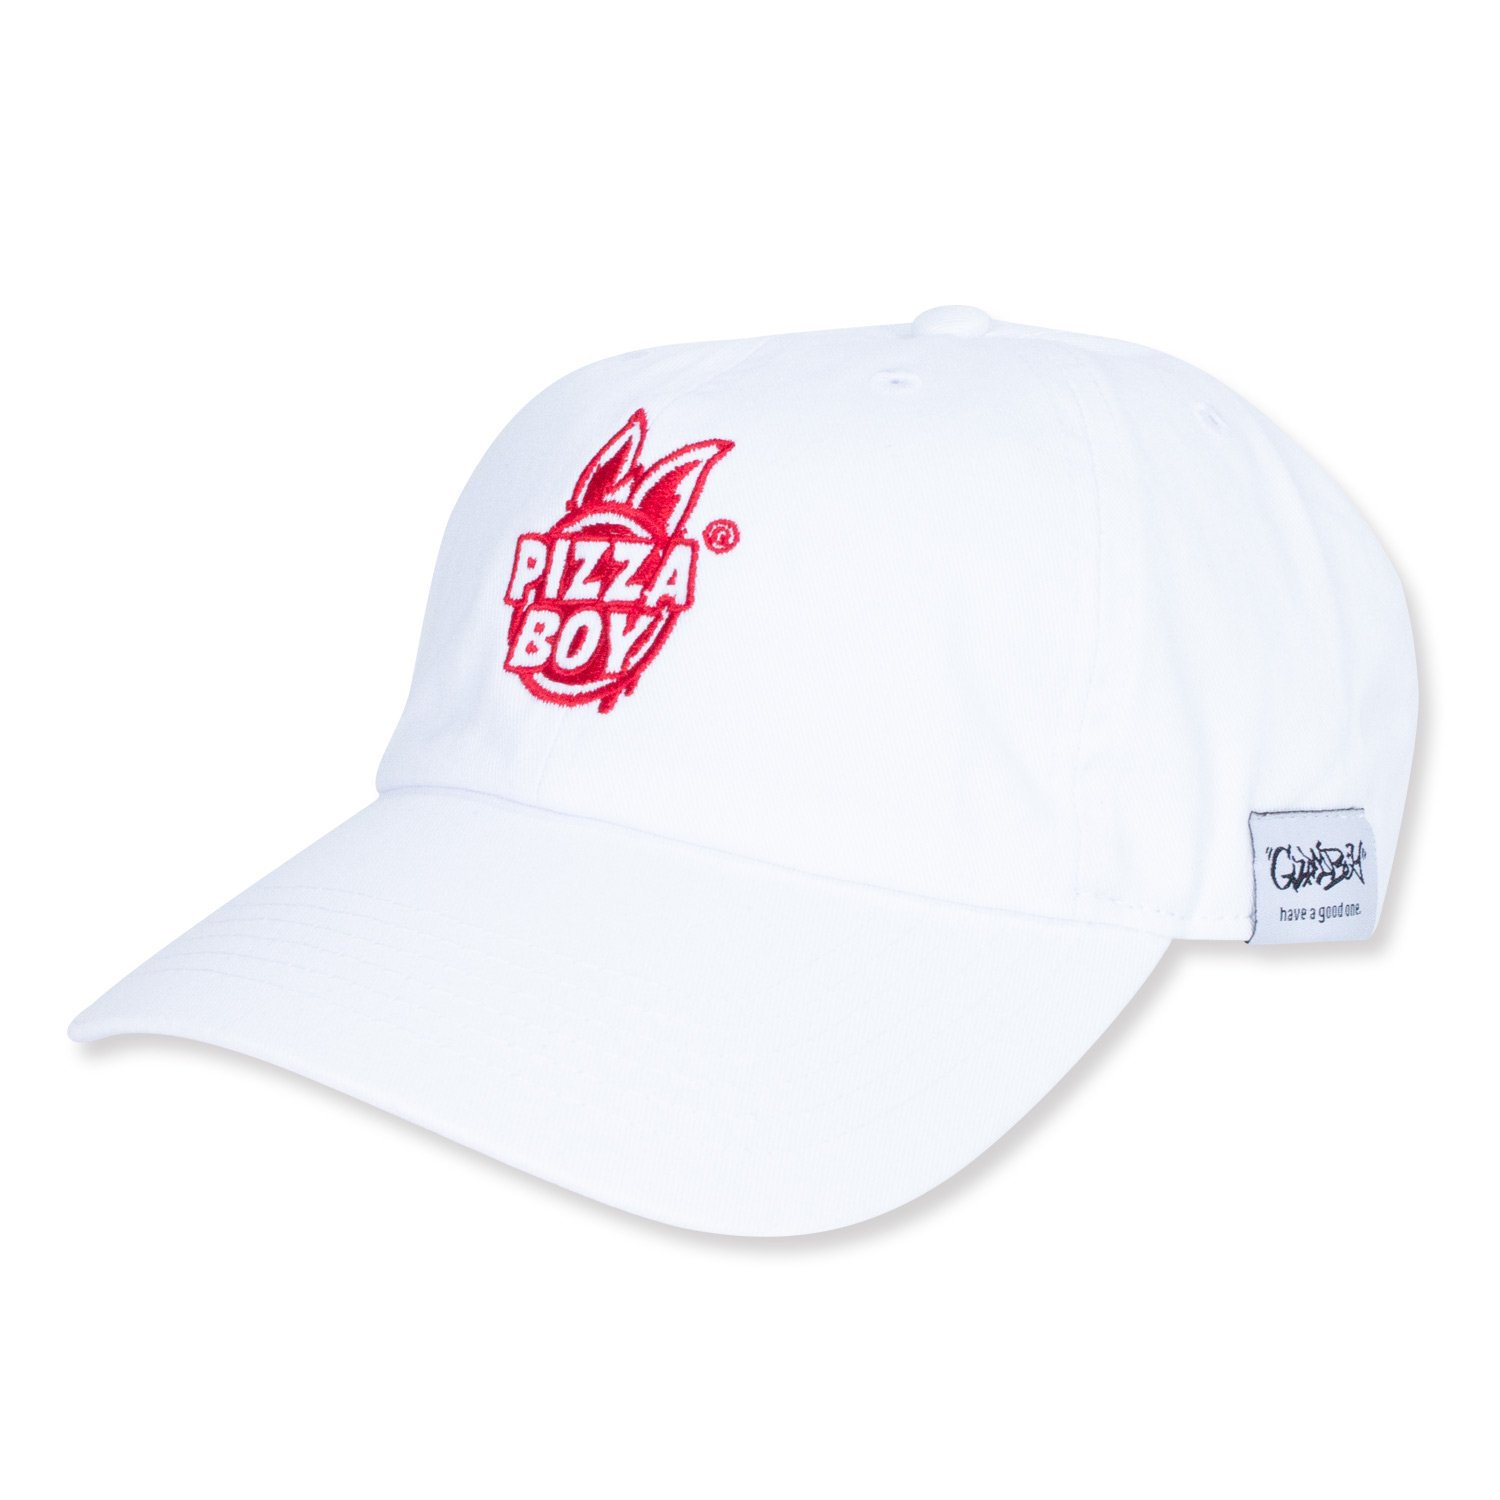 <img class='new_mark_img1' src='https://img.shop-pro.jp/img/new/icons8.gif' style='border:none;display:inline;margin:0px;padding:0px;width:auto;' />PIZZA BOY LOGO CAP WHITE